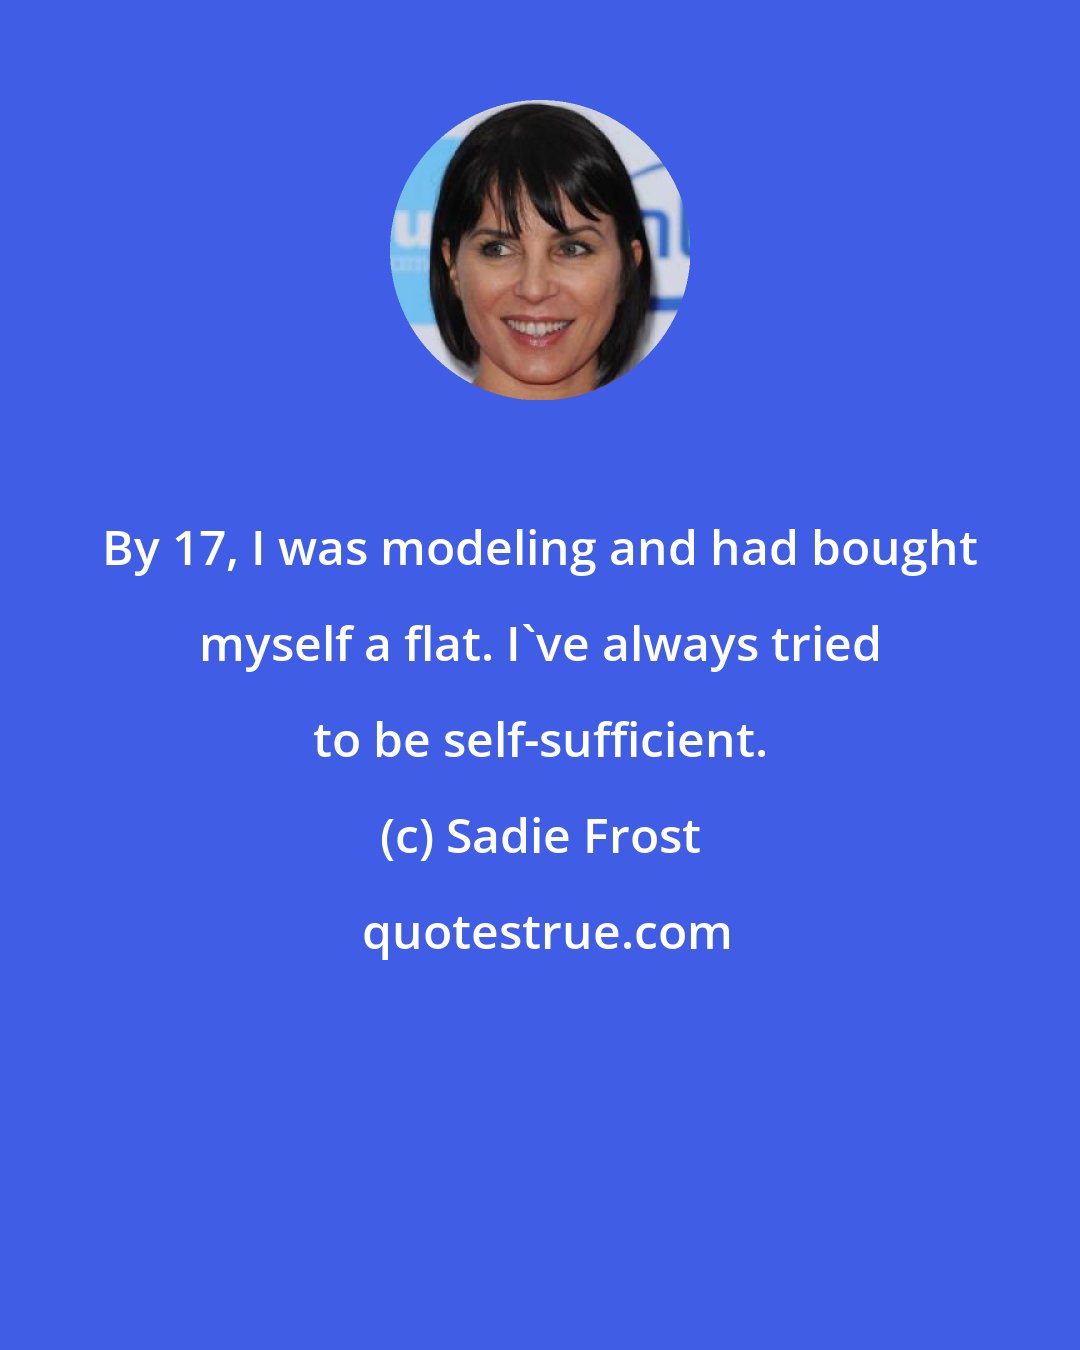 Sadie Frost: By 17, I was modeling and had bought myself a flat. I've always tried to be self-sufficient.